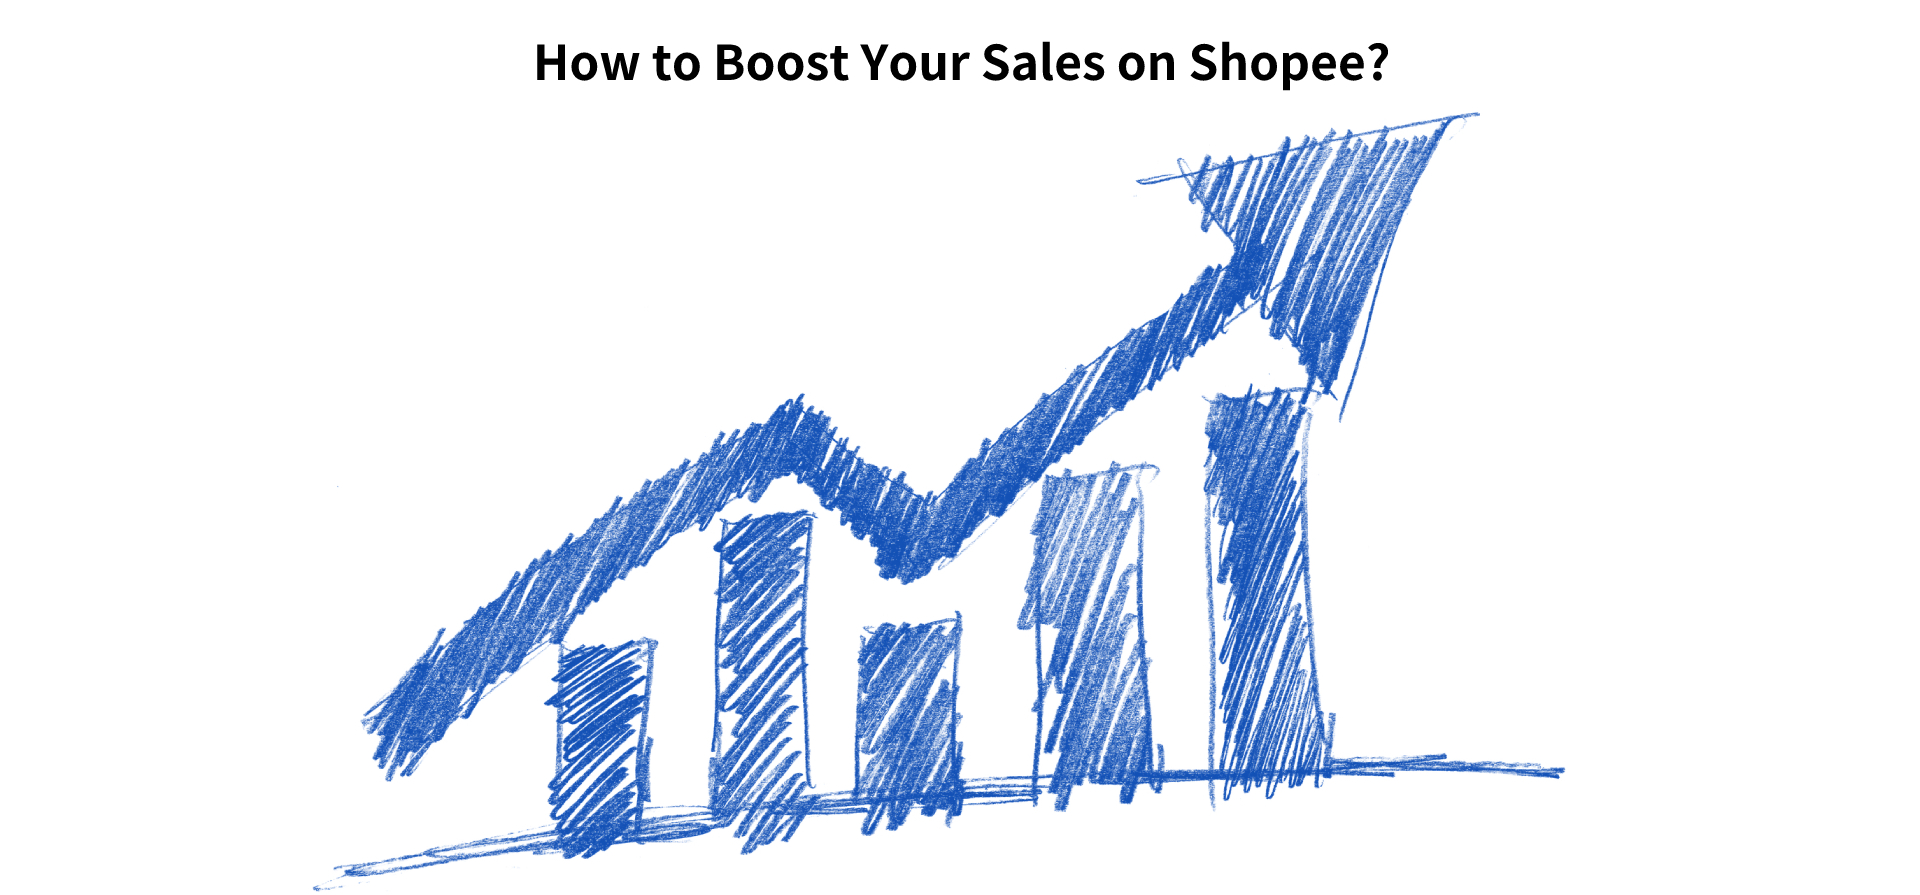 How to Boost Your Sales on Shopee?